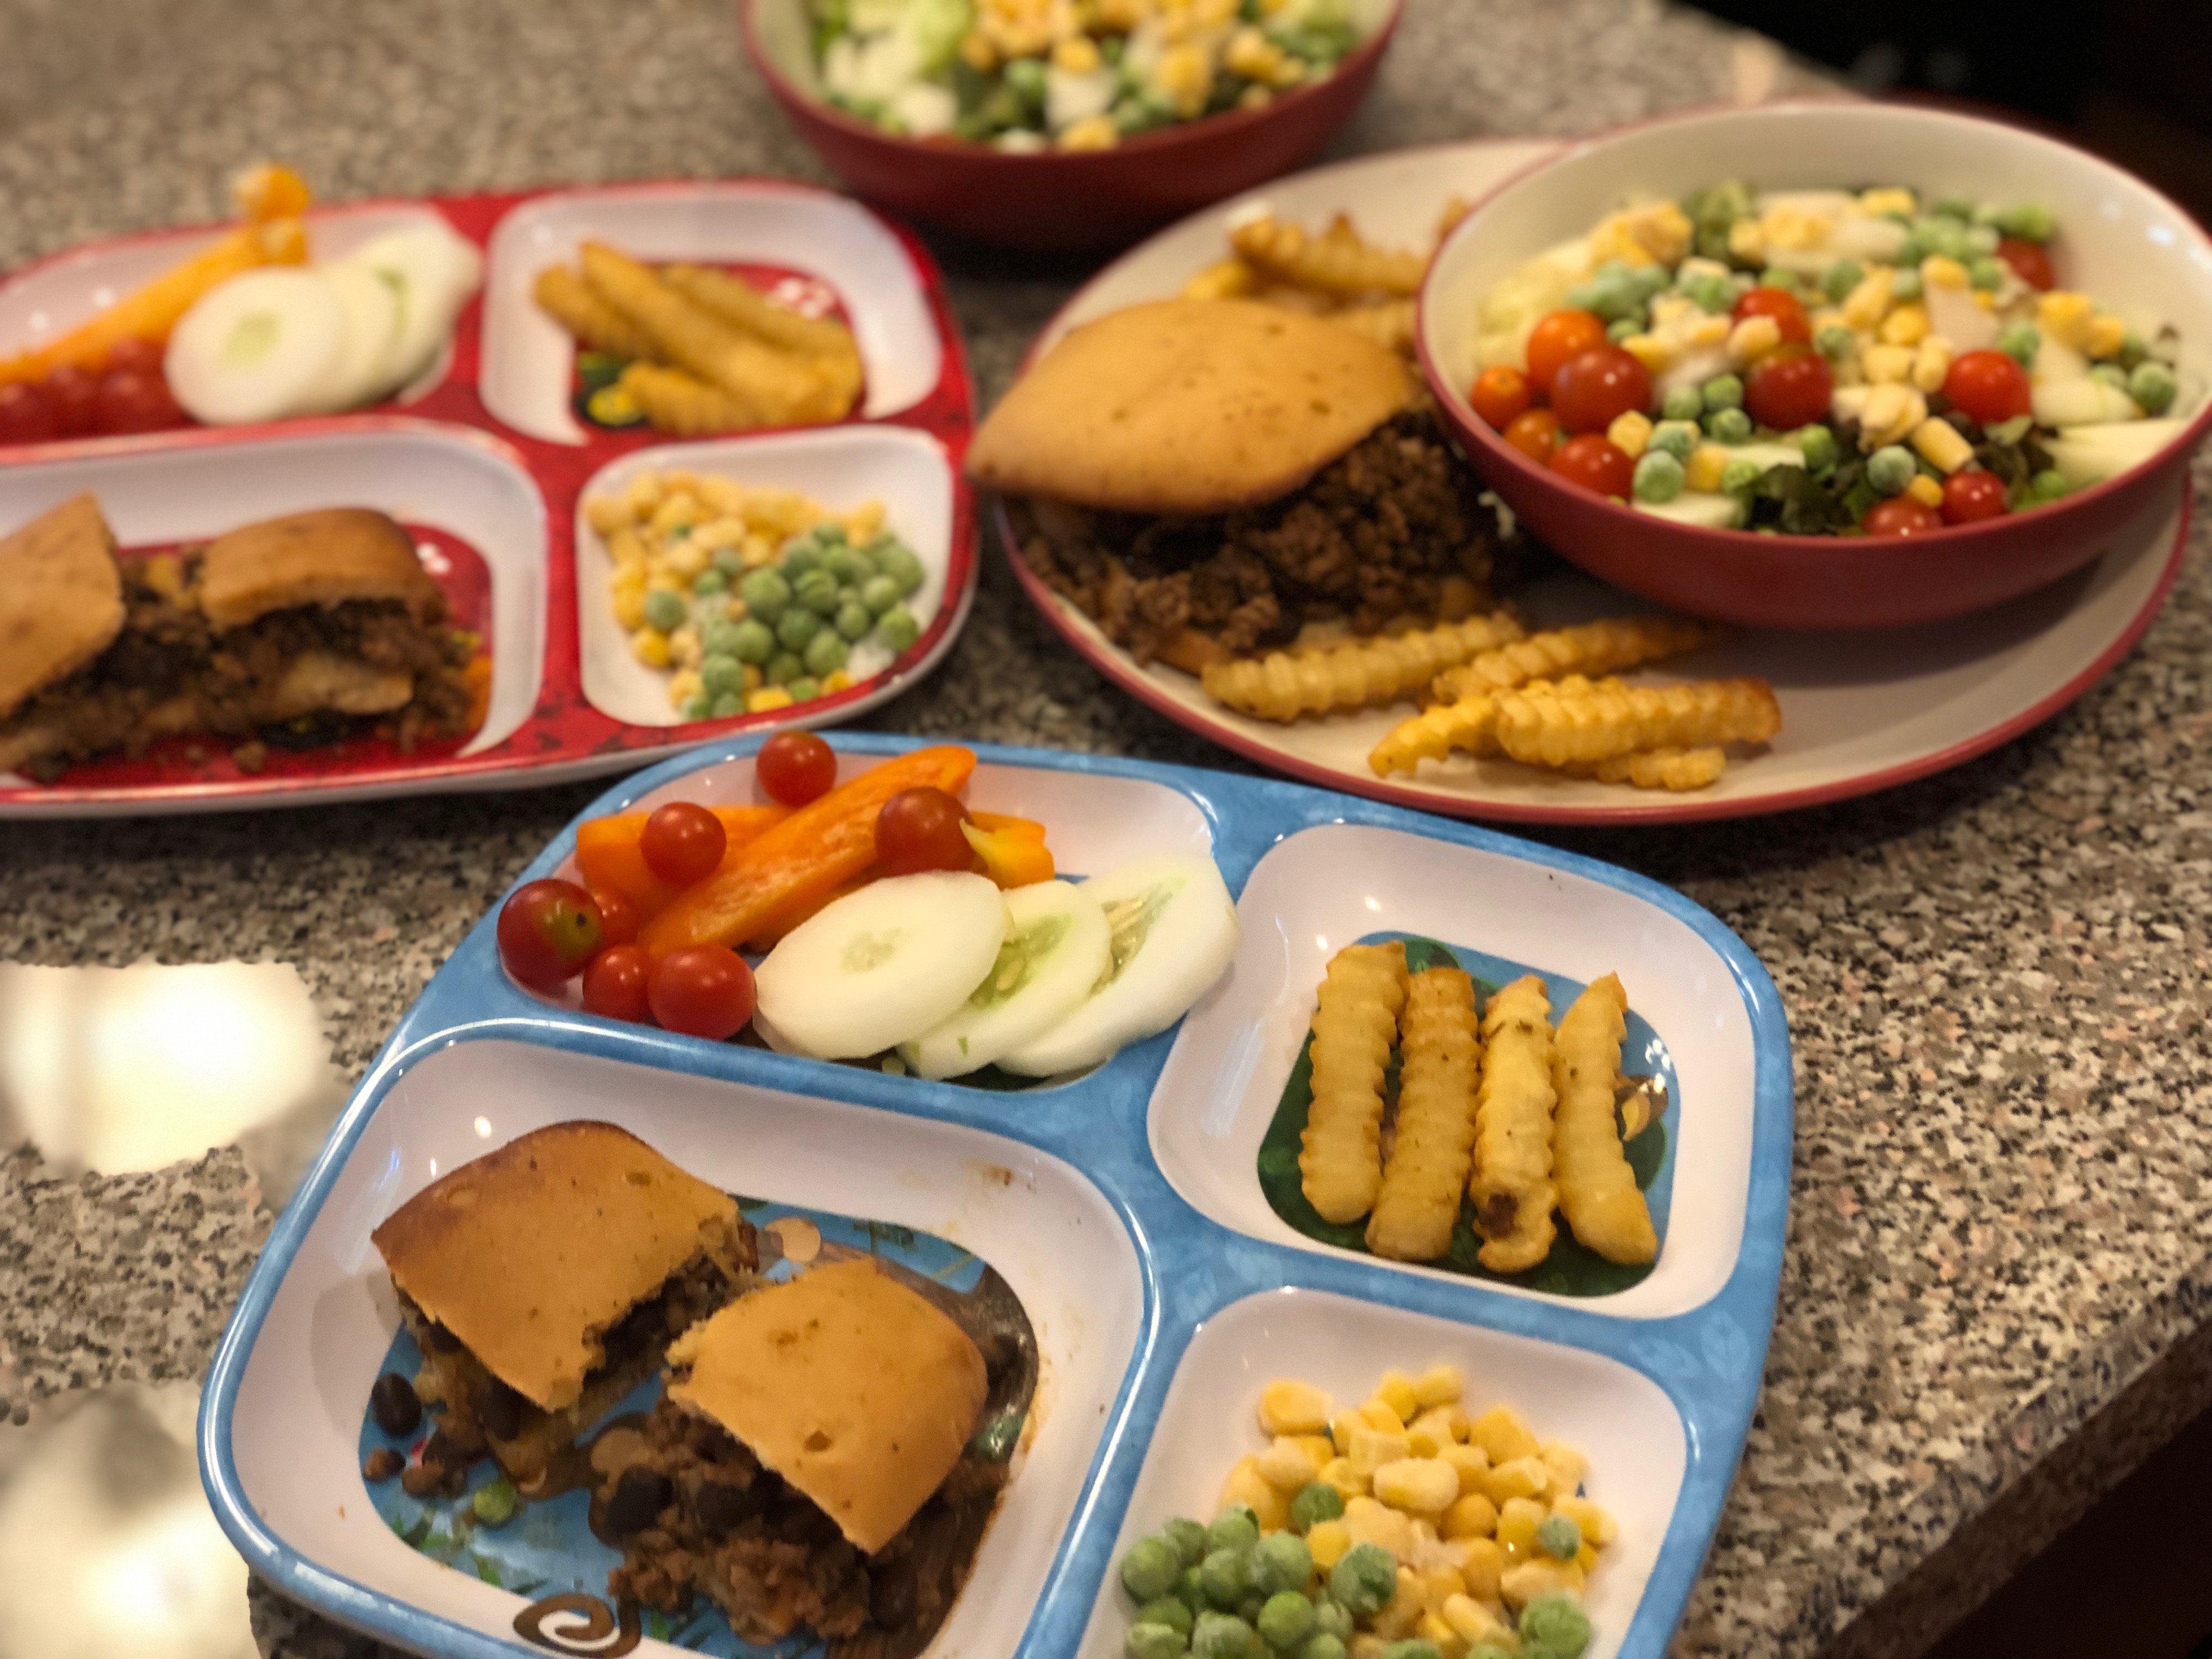 Sloppy joe plates- ours and kids